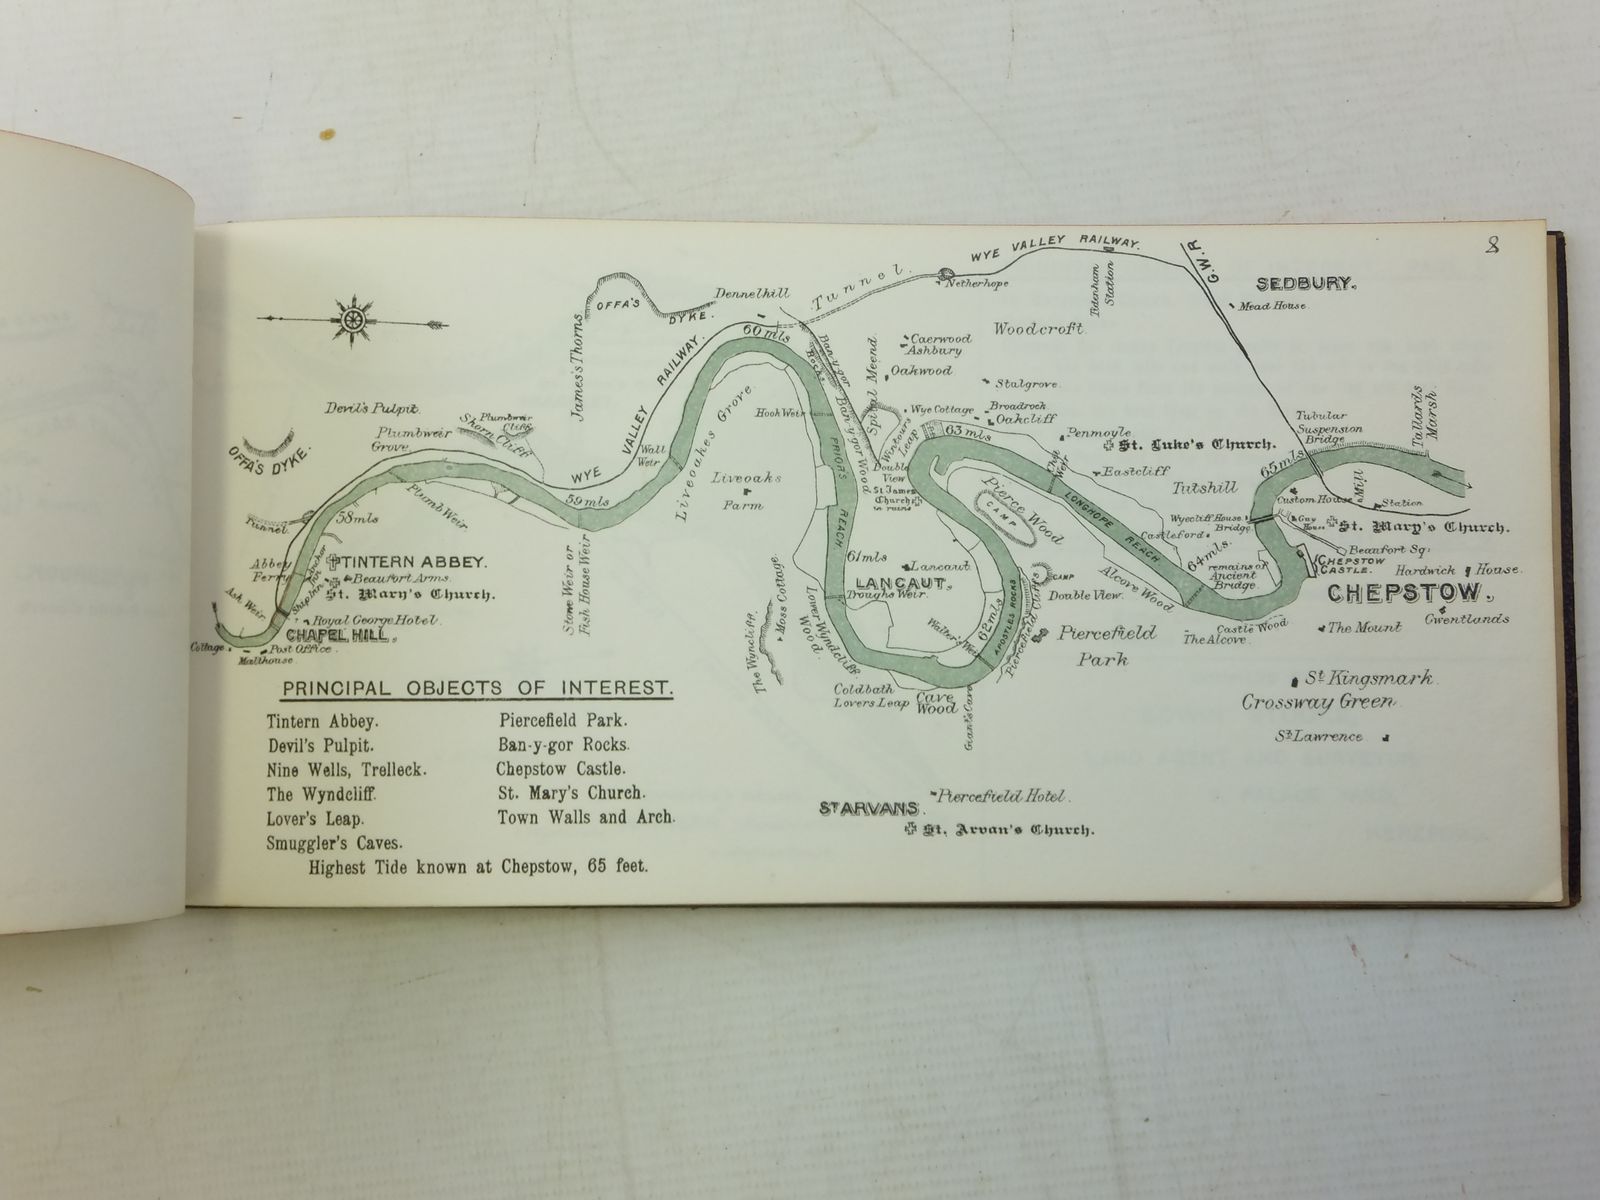 Photo of STOOKE'S TOURIST MAP OF THE RIVER WYE, FROM HEREFORD TO THE SEVERN written by Stooke, Edwin published by Simpkin, Marshall, Hamilton, Kent & Co. Ltd. (STOCK CODE: 2117187)  for sale by Stella & Rose's Books